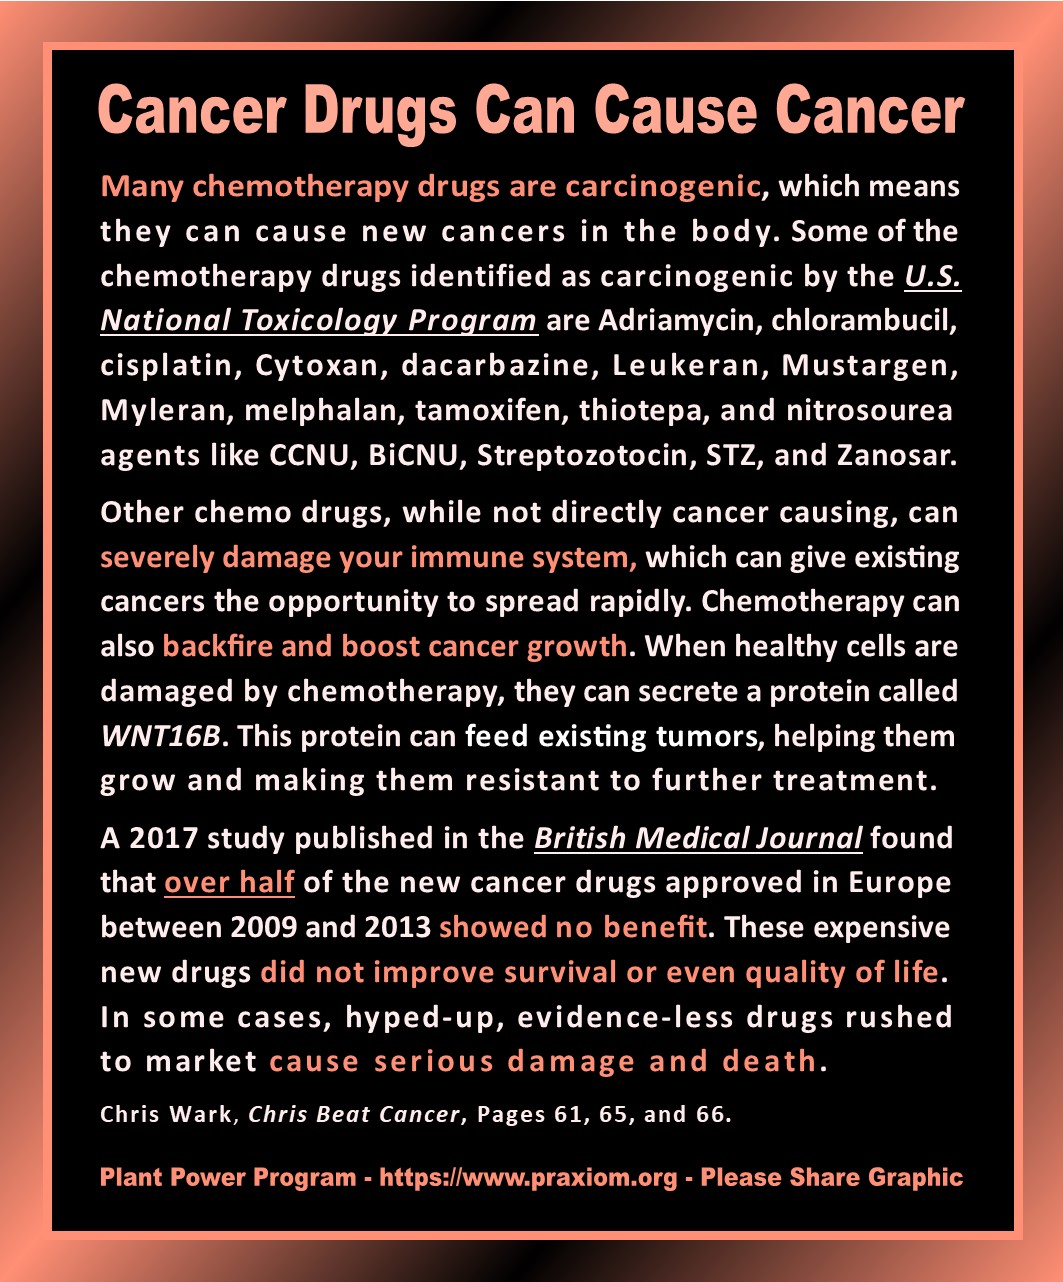 Cancer Drugs Can Cause Cancer - Chris Wark